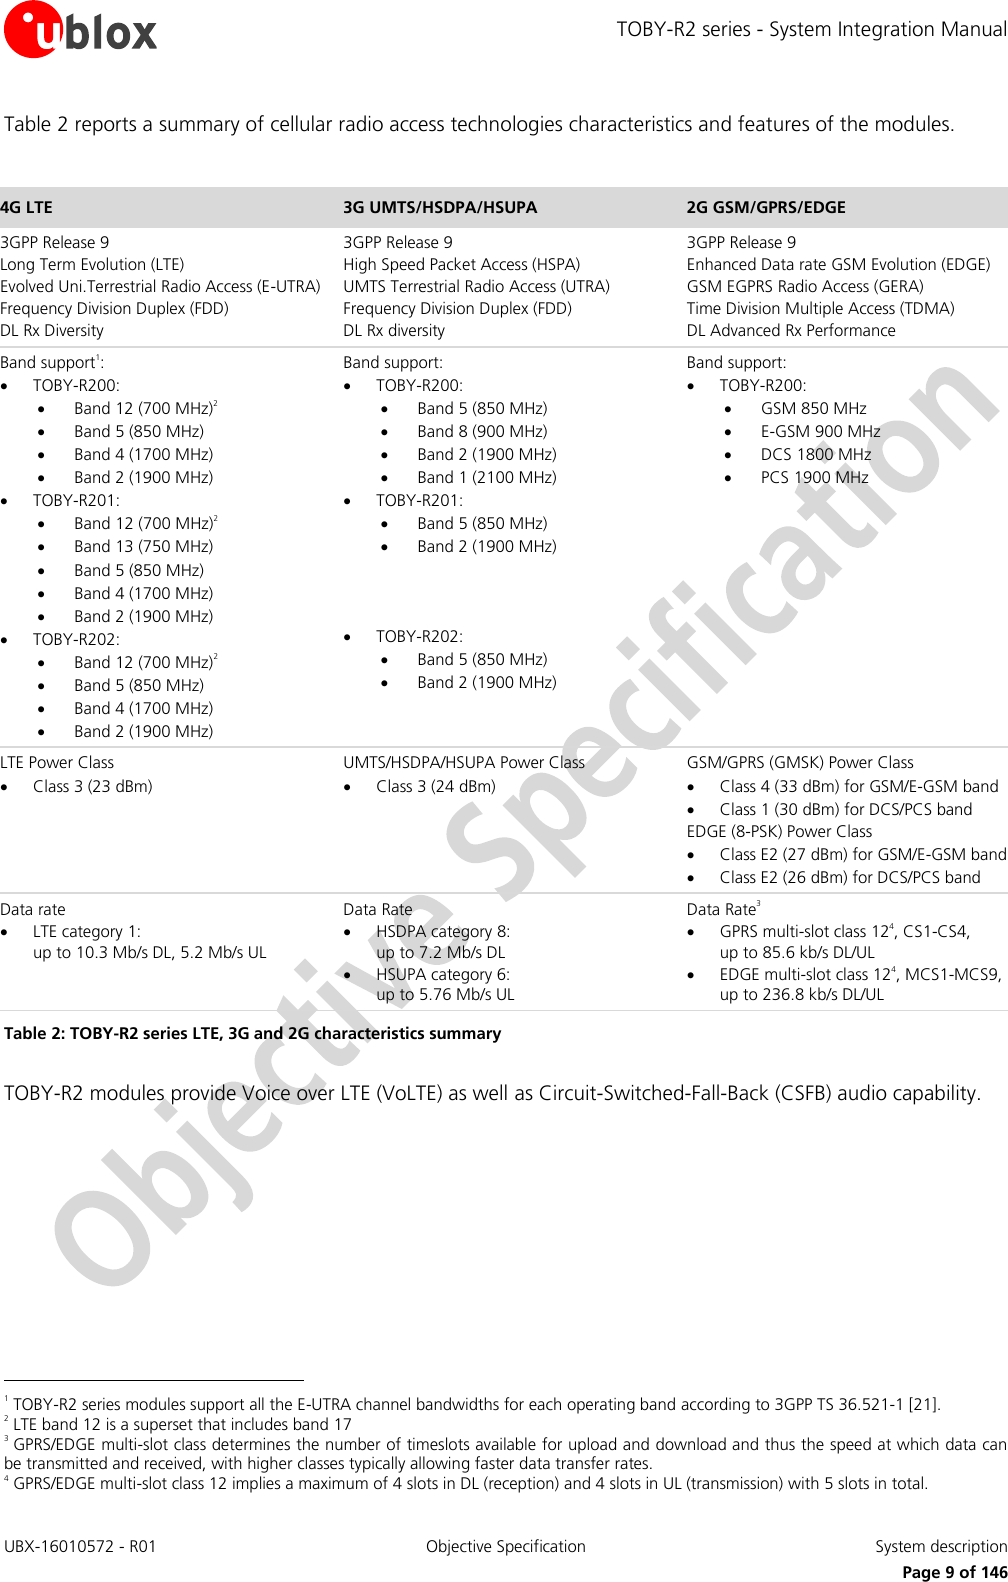 TOBY-R2 series - System Integration Manual UBX-16010572 - R01  Objective Specification  System description     Page 9 of 146 Table 2 reports a summary of cellular radio access technologies characteristics and features of the modules.  4G LTE 3G UMTS/HSDPA/HSUPA 2G GSM/GPRS/EDGE 3GPP Release 9 Long Term Evolution (LTE) Evolved Uni.Terrestrial Radio Access (E-UTRA) Frequency Division Duplex (FDD) DL Rx Diversity 3GPP Release 9 High Speed Packet Access (HSPA) UMTS Terrestrial Radio Access (UTRA)  Frequency Division Duplex (FDD) DL Rx diversity  3GPP Release 9 Enhanced Data rate GSM Evolution (EDGE) GSM EGPRS Radio Access (GERA) Time Division Multiple Access (TDMA) DL Advanced Rx Performance  Band support1:  TOBY-R200:  Band 12 (700 MHz)2  Band 5 (850 MHz)  Band 4 (1700 MHz)  Band 2 (1900 MHz)  TOBY-R201:  Band 12 (700 MHz)2  Band 13 (750 MHz)  Band 5 (850 MHz)  Band 4 (1700 MHz)  Band 2 (1900 MHz)  TOBY-R202:  Band 12 (700 MHz)2  Band 5 (850 MHz)  Band 4 (1700 MHz)  Band 2 (1900 MHz) Band support:  TOBY-R200:  Band 5 (850 MHz)  Band 8 (900 MHz)  Band 2 (1900 MHz)  Band 1 (2100 MHz)  TOBY-R201:  Band 5 (850 MHz)  Band 2 (1900 MHz)     TOBY-R202:  Band 5 (850 MHz)  Band 2 (1900 MHz)  Band support:  TOBY-R200:  GSM 850 MHz  E-GSM 900 MHz  DCS 1800 MHz  PCS 1900 MHz  LTE Power Class  Class 3 (23 dBm)  UMTS/HSDPA/HSUPA Power Class  Class 3 (24 dBm)  GSM/GPRS (GMSK) Power Class  Class 4 (33 dBm) for GSM/E-GSM band  Class 1 (30 dBm) for DCS/PCS band EDGE (8-PSK) Power Class  Class E2 (27 dBm) for GSM/E-GSM band  Class E2 (26 dBm) for DCS/PCS band Data rate  LTE category 1:  up to 10.3 Mb/s DL, 5.2 Mb/s UL  Data Rate  HSDPA category 8: up to 7.2 Mb/s DL  HSUPA category 6:  up to 5.76 Mb/s UL Data Rate3  GPRS multi-slot class 124, CS1-CS4,  up to 85.6 kb/s DL/UL   EDGE multi-slot class 124, MCS1-MCS9, up to 236.8 kb/s DL/UL  Table 2: TOBY-R2 series LTE, 3G and 2G characteristics summary  TOBY-R2 modules provide Voice over LTE (VoLTE) as well as Circuit-Switched-Fall-Back (CSFB) audio capability.                                                        1 TOBY-R2 series modules support all the E-UTRA channel bandwidths for each operating band according to 3GPP TS 36.521-1 [21]. 2 LTE band 12 is a superset that includes band 17 3 GPRS/EDGE multi-slot class determines the number of timeslots available for upload and download and thus the speed at which data can be transmitted and received, with higher classes typically allowing faster data transfer rates. 4 GPRS/EDGE multi-slot class 12 implies a maximum of 4 slots in DL (reception) and 4 slots in UL (transmission) with 5 slots in total. 